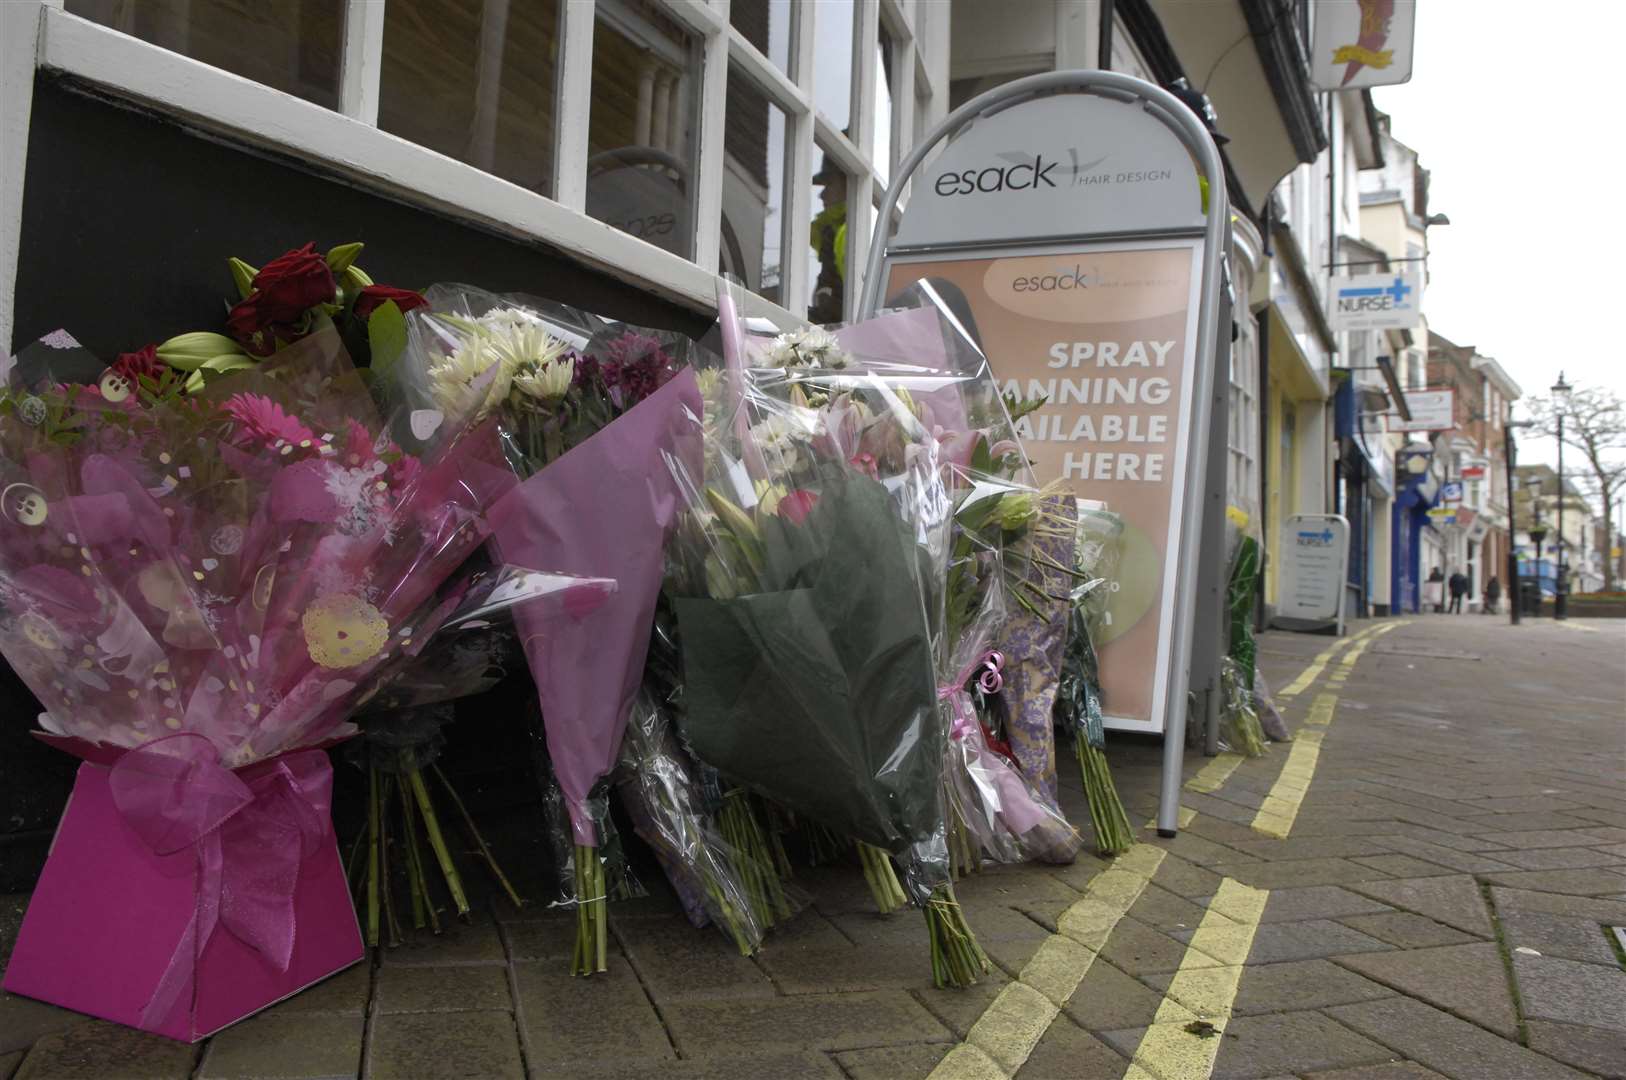 Flowers left at the scene of the stabbing at Esack Hair and Beauty on Ashford High Street Picture: Gary Browne